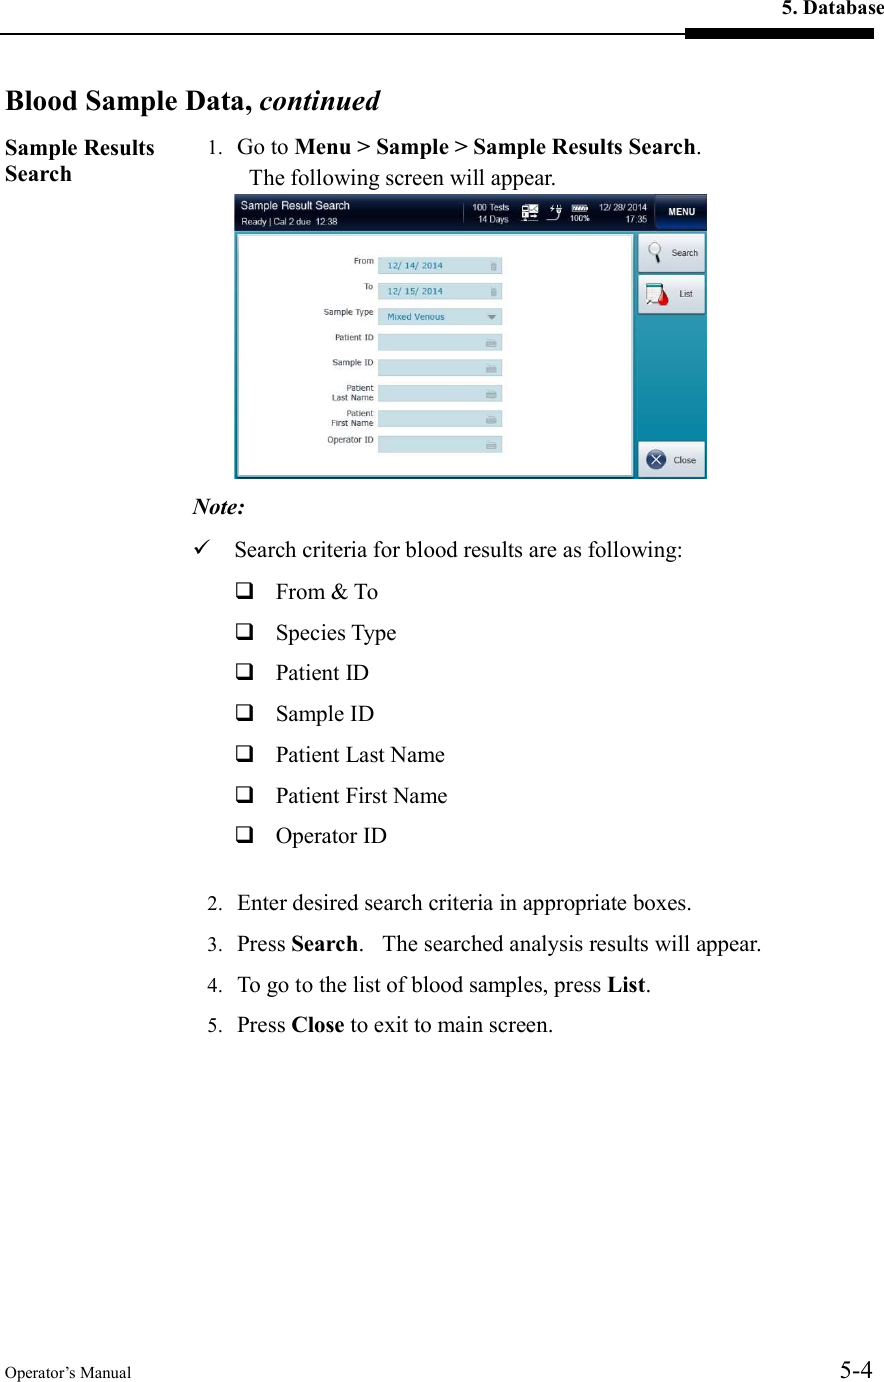 5. Database Operator’s Manual  5-4  Blood Sample Data, continuedSample Results Search 1. Go to Menu &gt; Sample &gt; Sample Results Search.     The following screen will appear.  Note:  Search criteria for blood results are as following:  From &amp; To  Species Type  Patient ID  Sample ID  Patient Last Name  Patient First Name  Operator ID  2. Enter desired search criteria in appropriate boxes. 3. Press Search.    The searched analysis results will appear. 4. To go to the list of blood samples, press List. 5. Press Close to exit to main screen.   